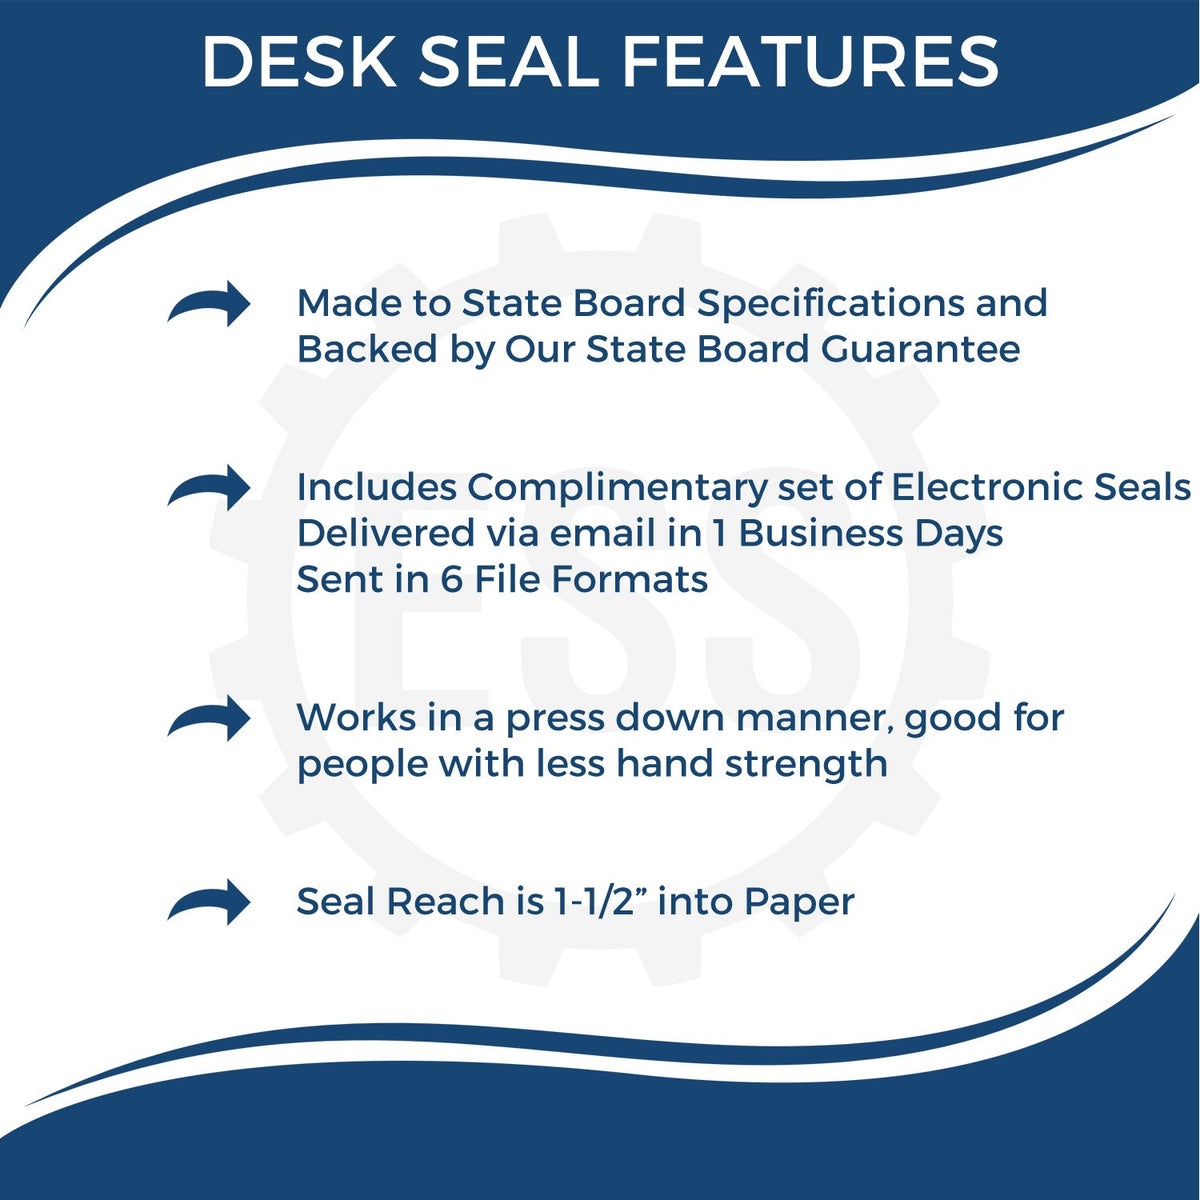 A picture of an infographic highlighting the selling points for the Missouri Engineer Desk Seal